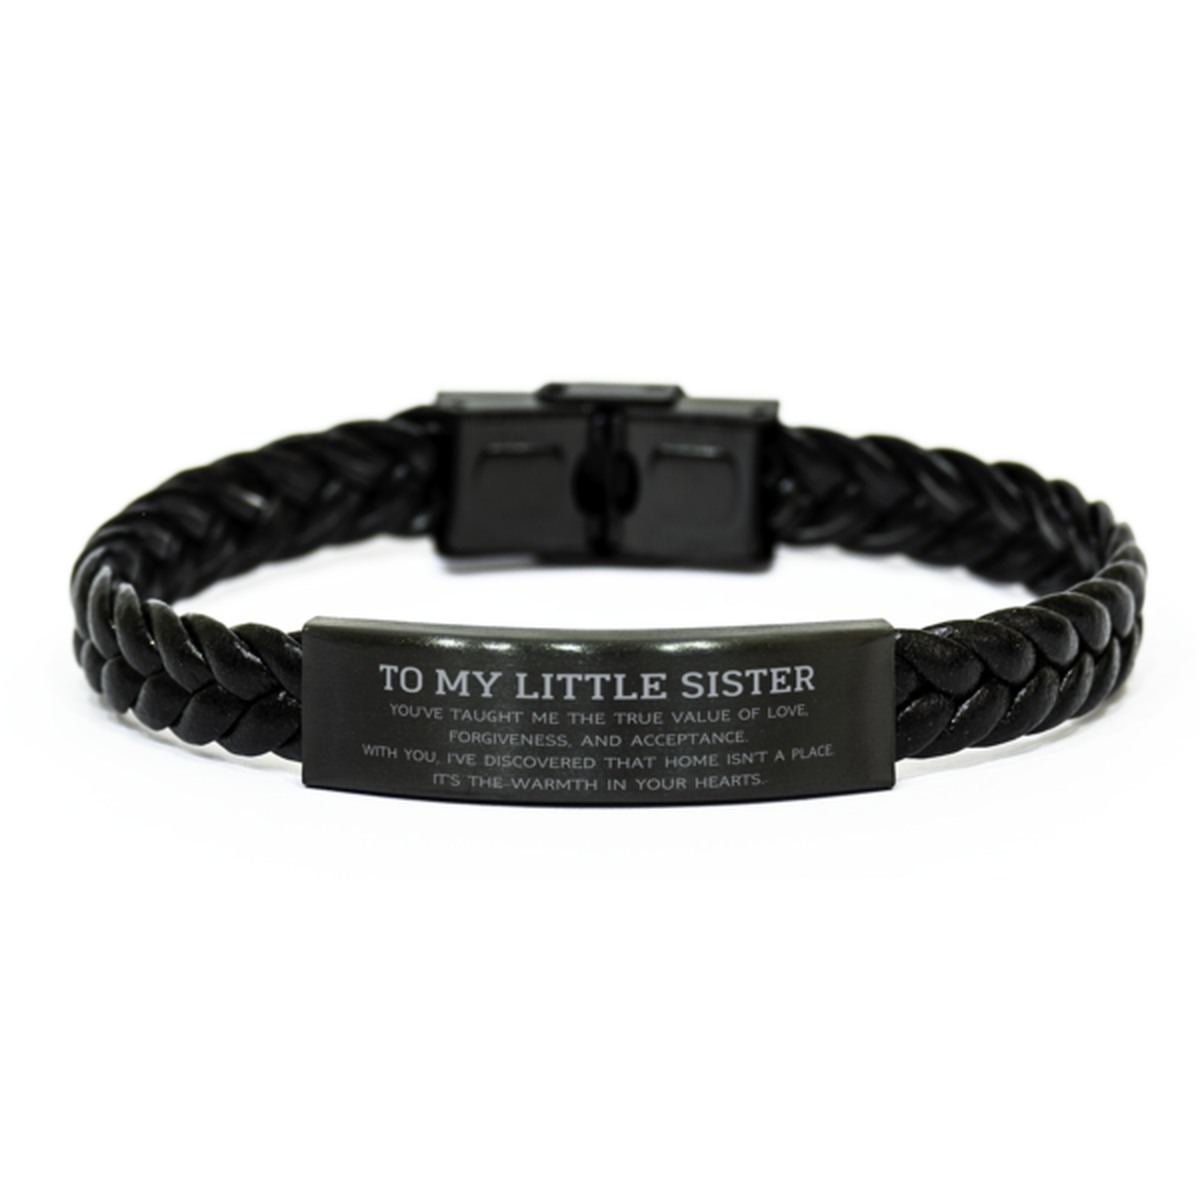 To My Little Sister Gifts, You've taught me the true value of love, Thank You Gifts For Little Sister, Birthday Braided Leather Bracelet For Little Sister